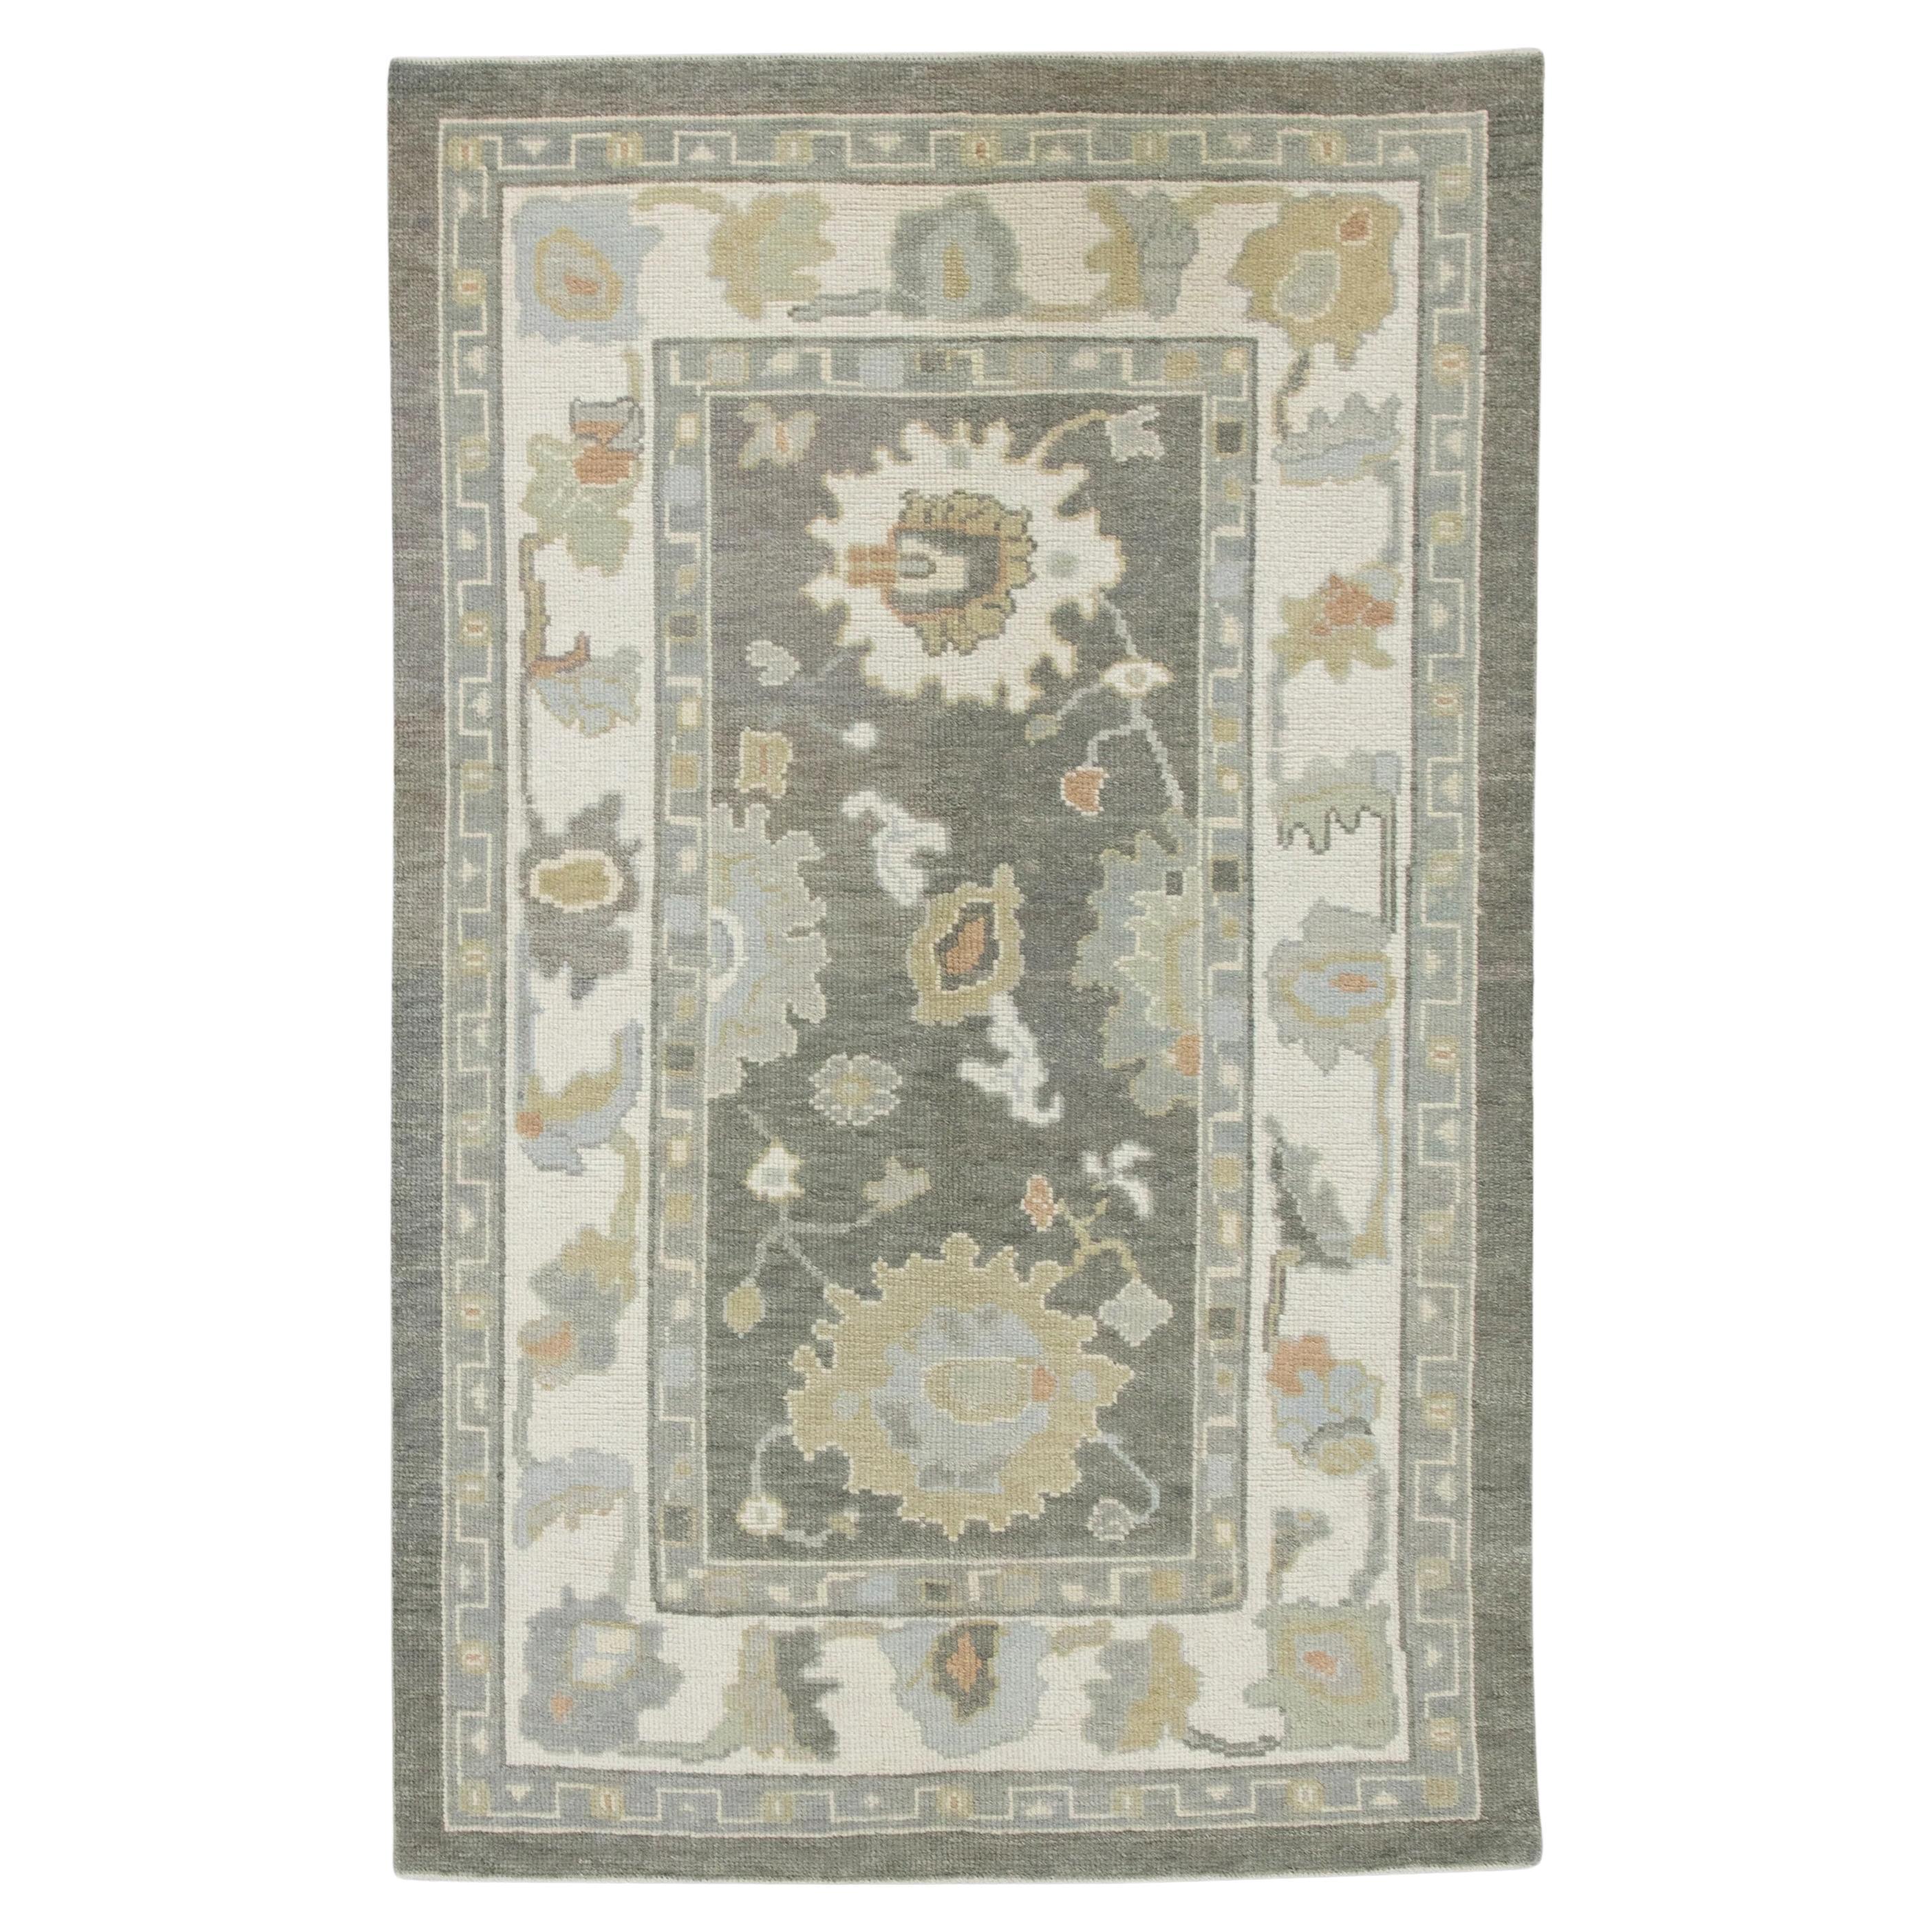 Green Floral Pattern Handwoven Wool Turkish Oushak Rug 3'9" x 6'1" For Sale